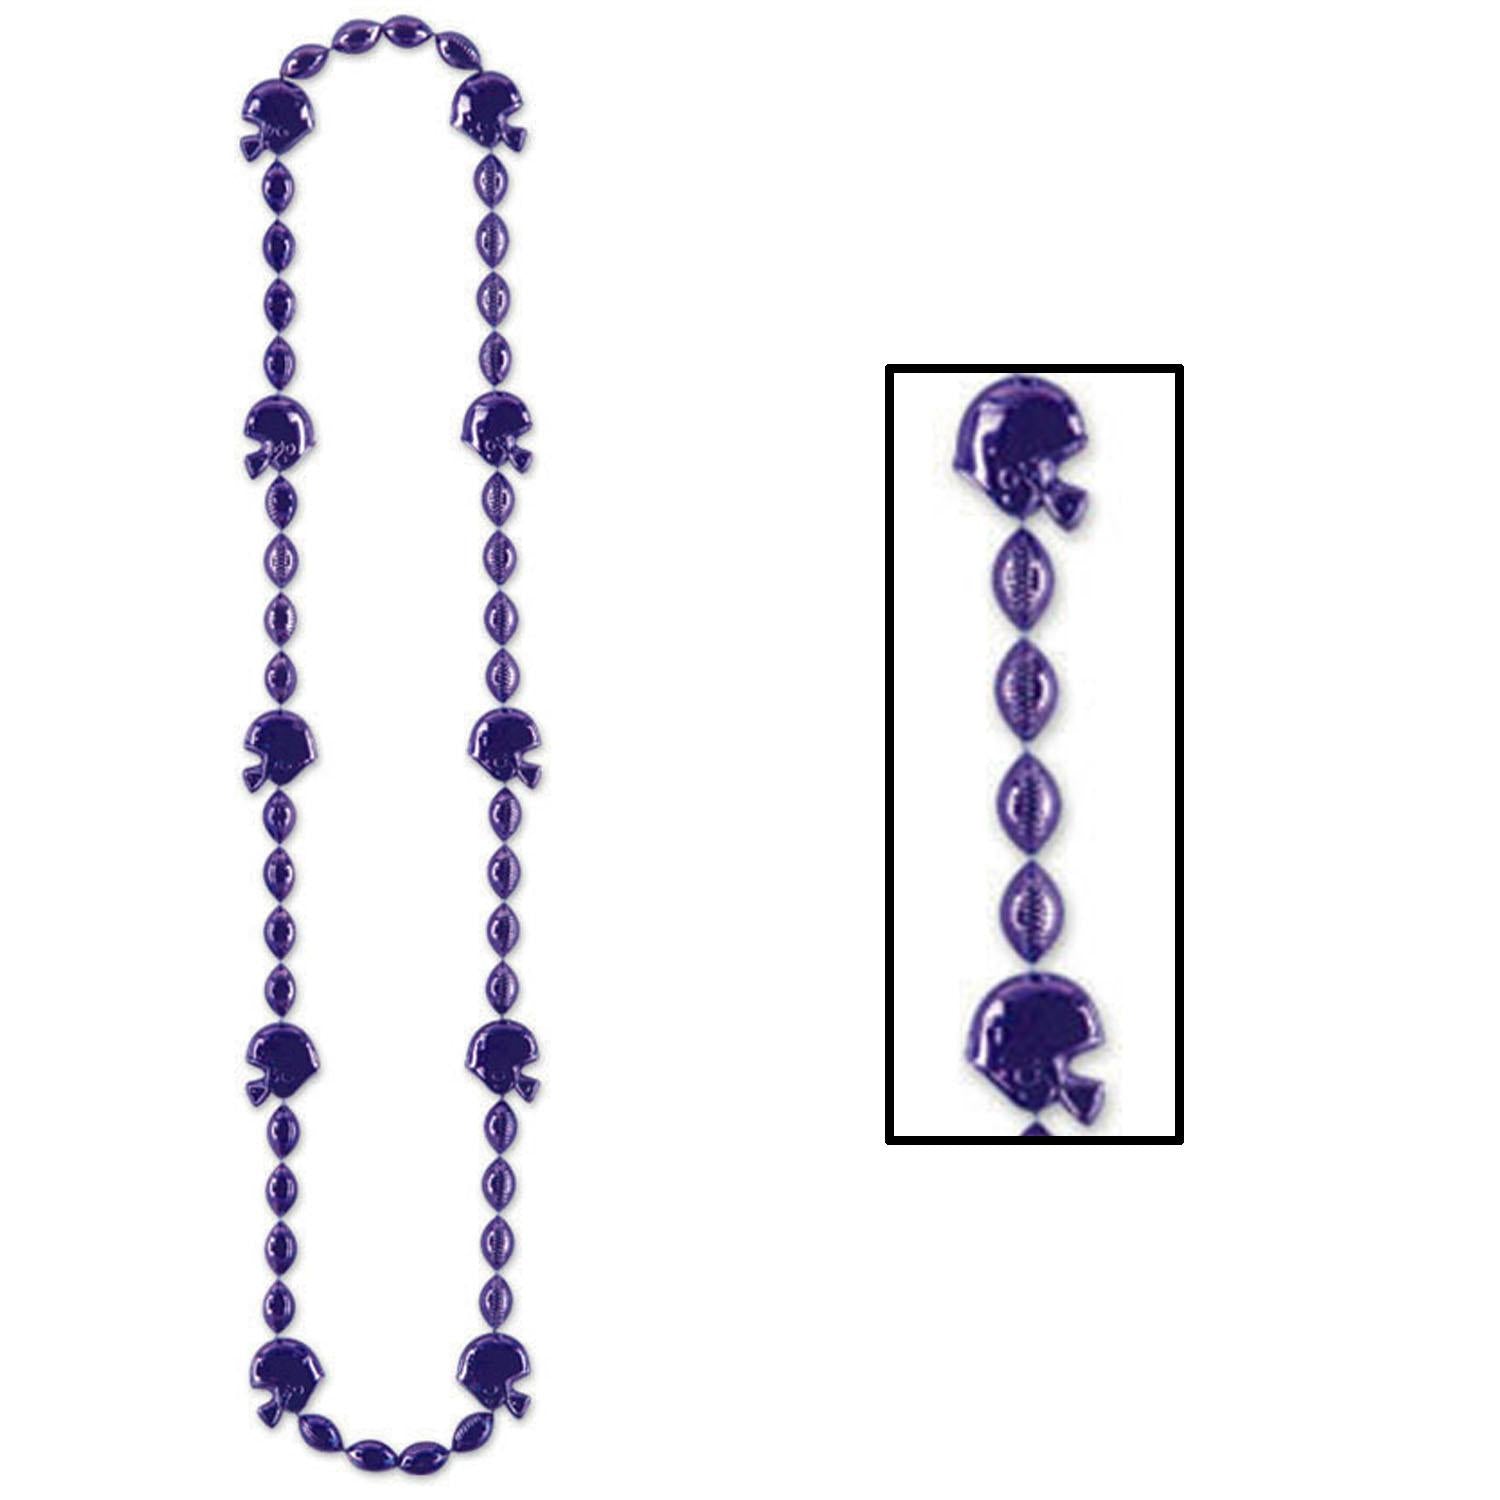 Beistle Football Party Bead Necklaces - Purple